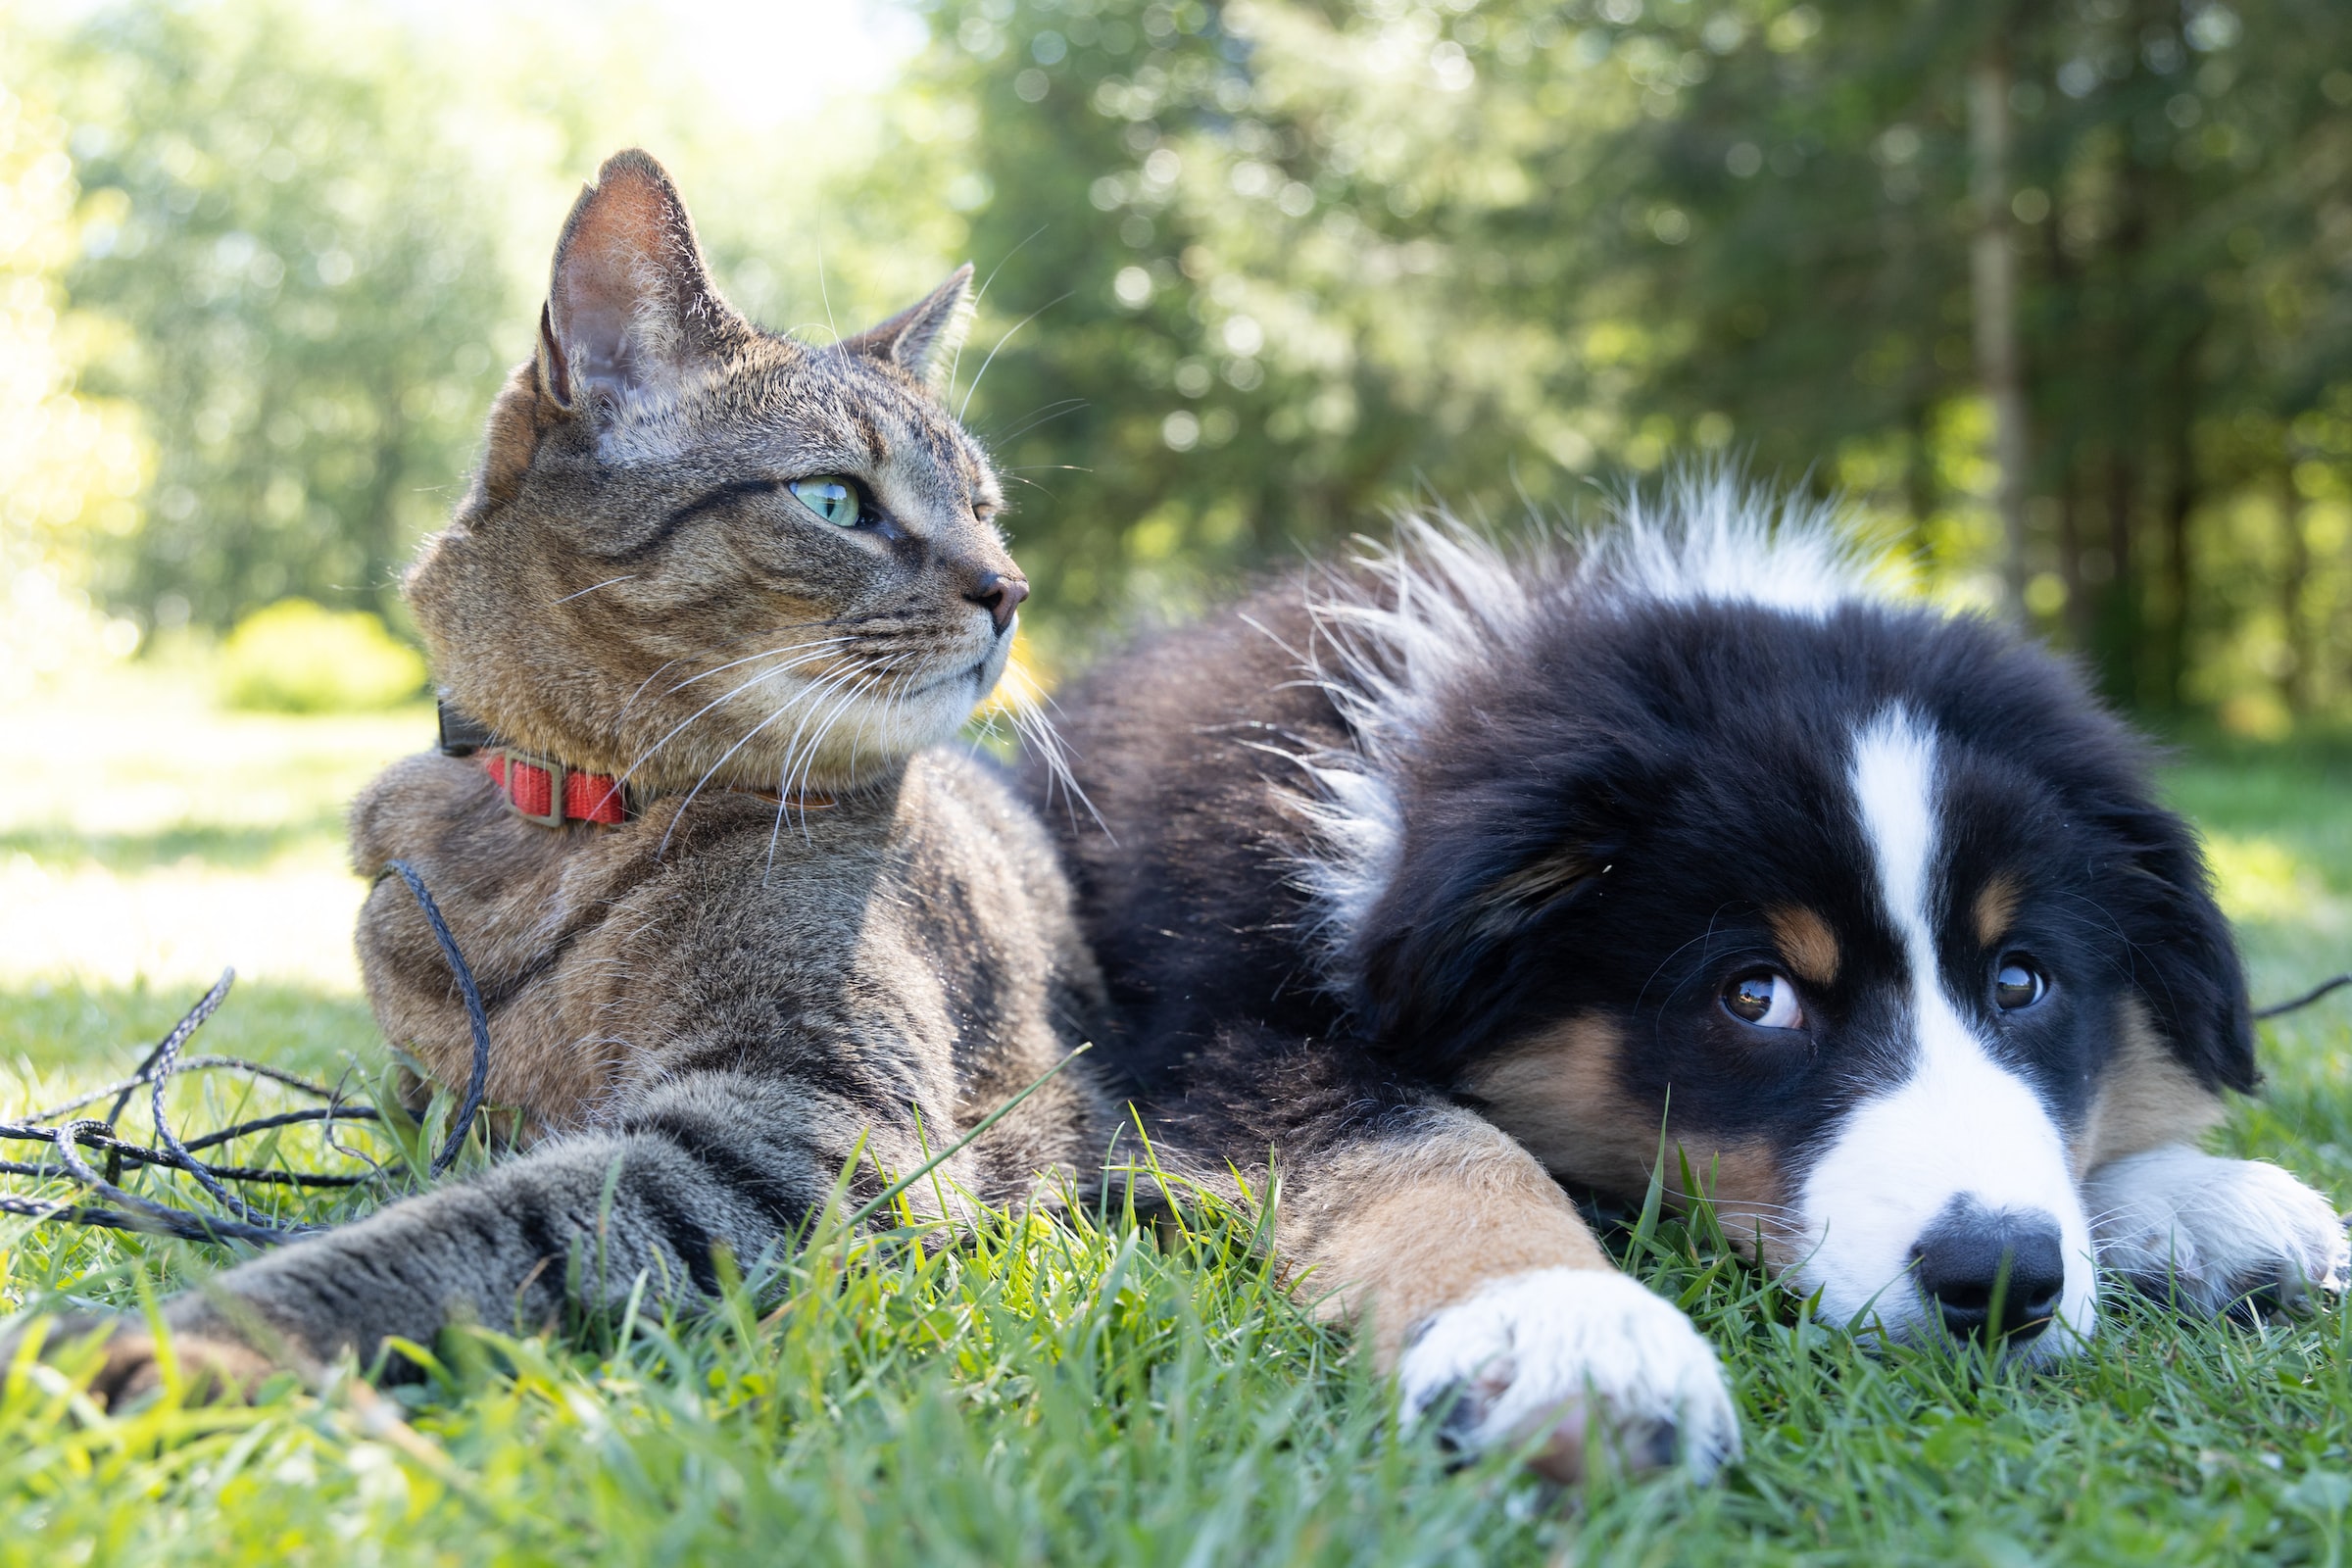 A cat and a dog sit next to each other in the grass